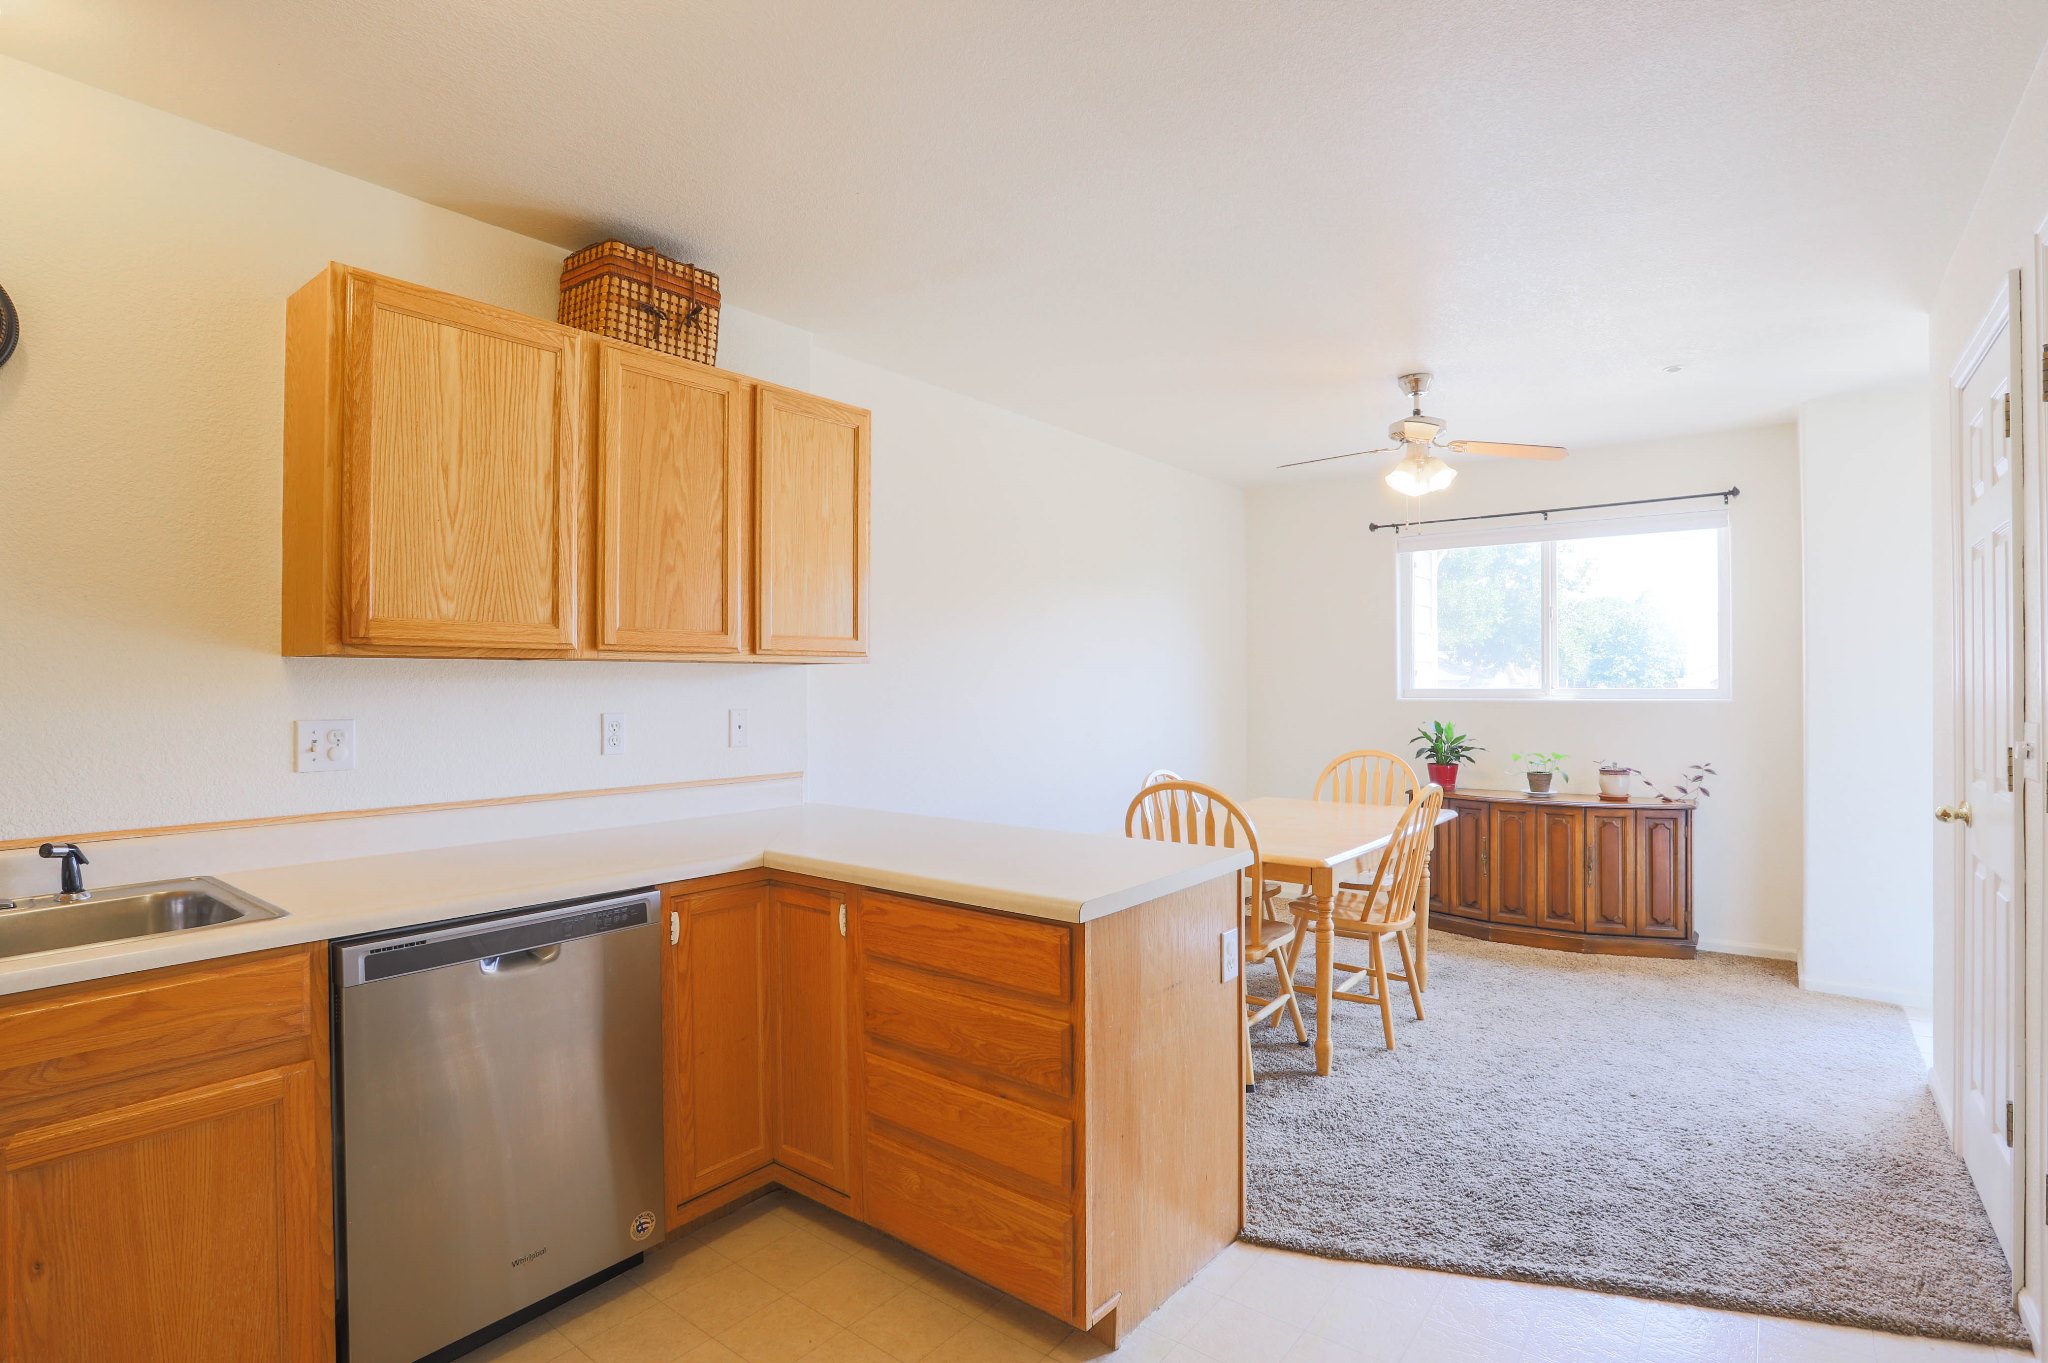 REAL ESTATE LISTING: 1601 Great Western Dr Longmont Kitchen and Dining Room